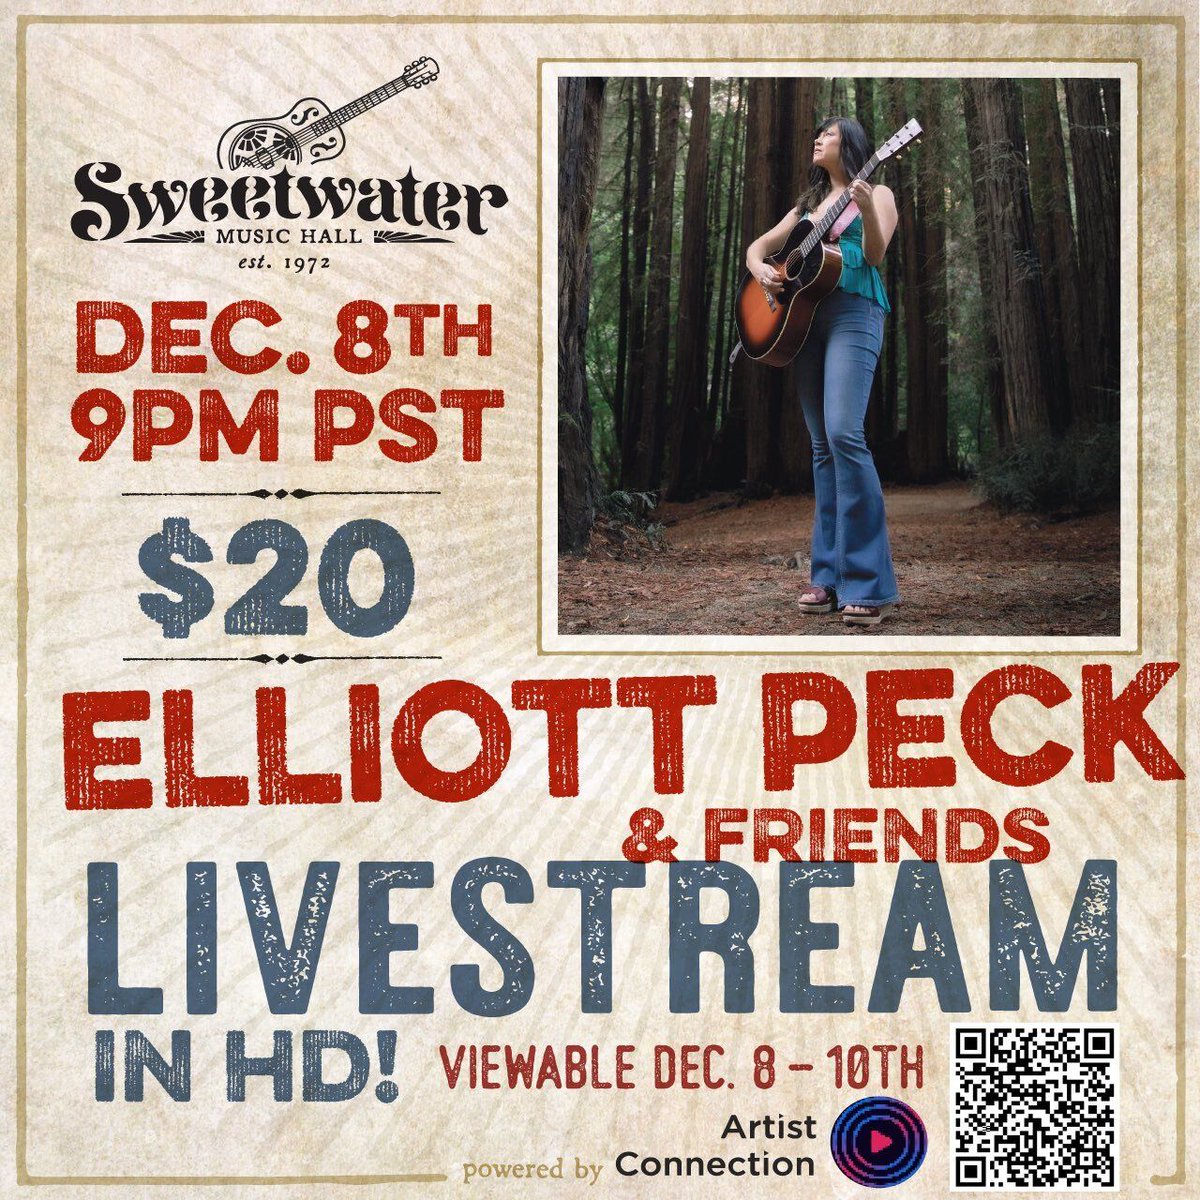 Mark your calendars for Elliott Peck's exclusive live stream on December 8th, starting at 9 PM! Renowned for her vocals and Midnight North fame, she's set to dazzle.  Bonus, you can relive the show until December 10th.
buff.ly/3uEKf9G